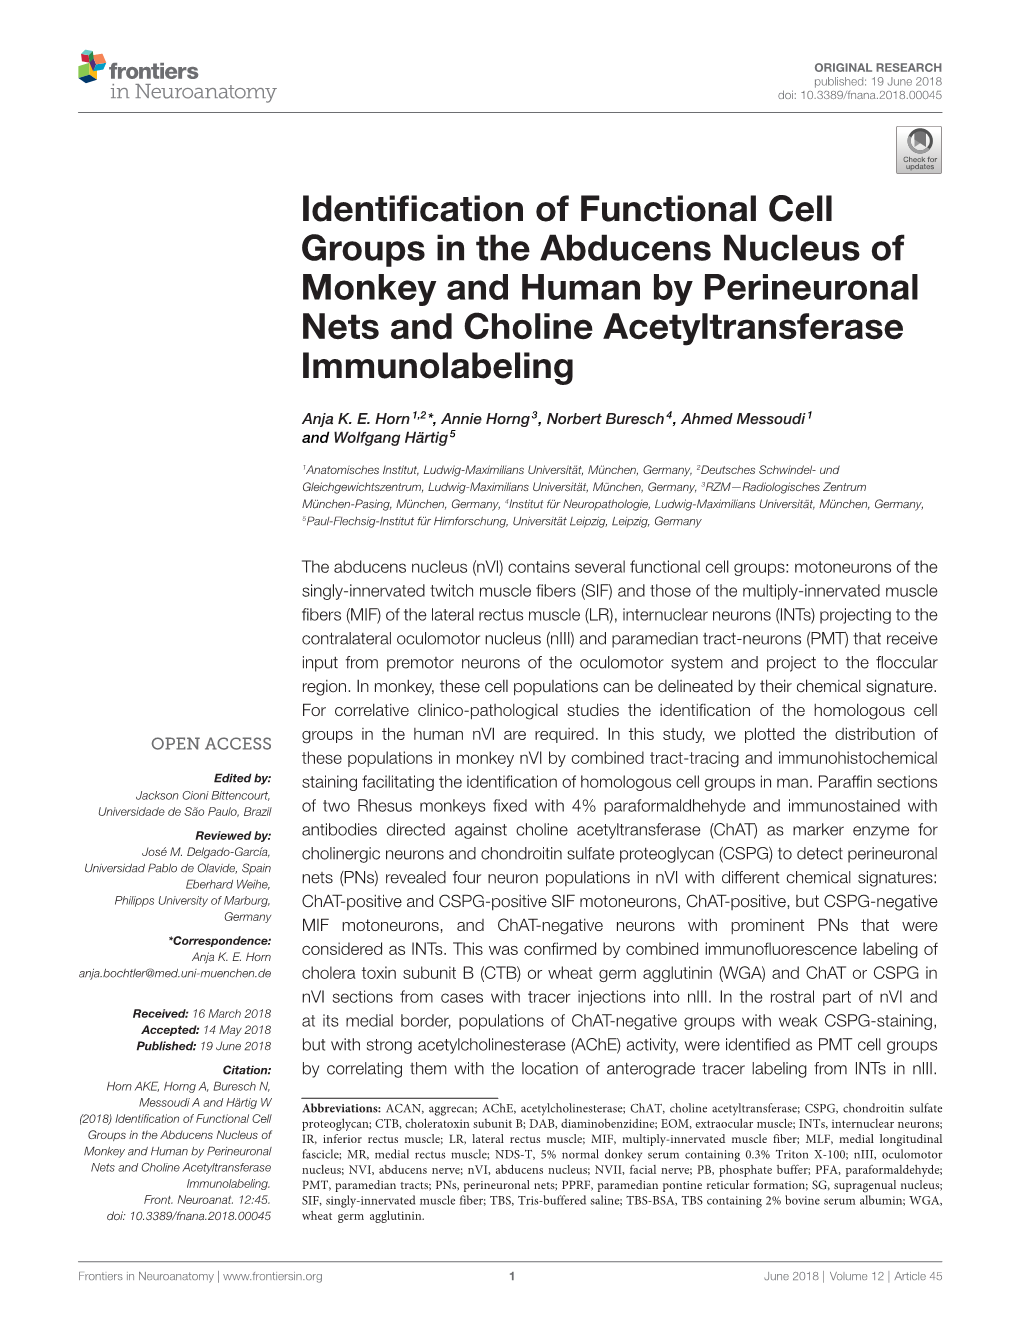 Identification of Functional Cell Groups in the Abducens Nucleus Of